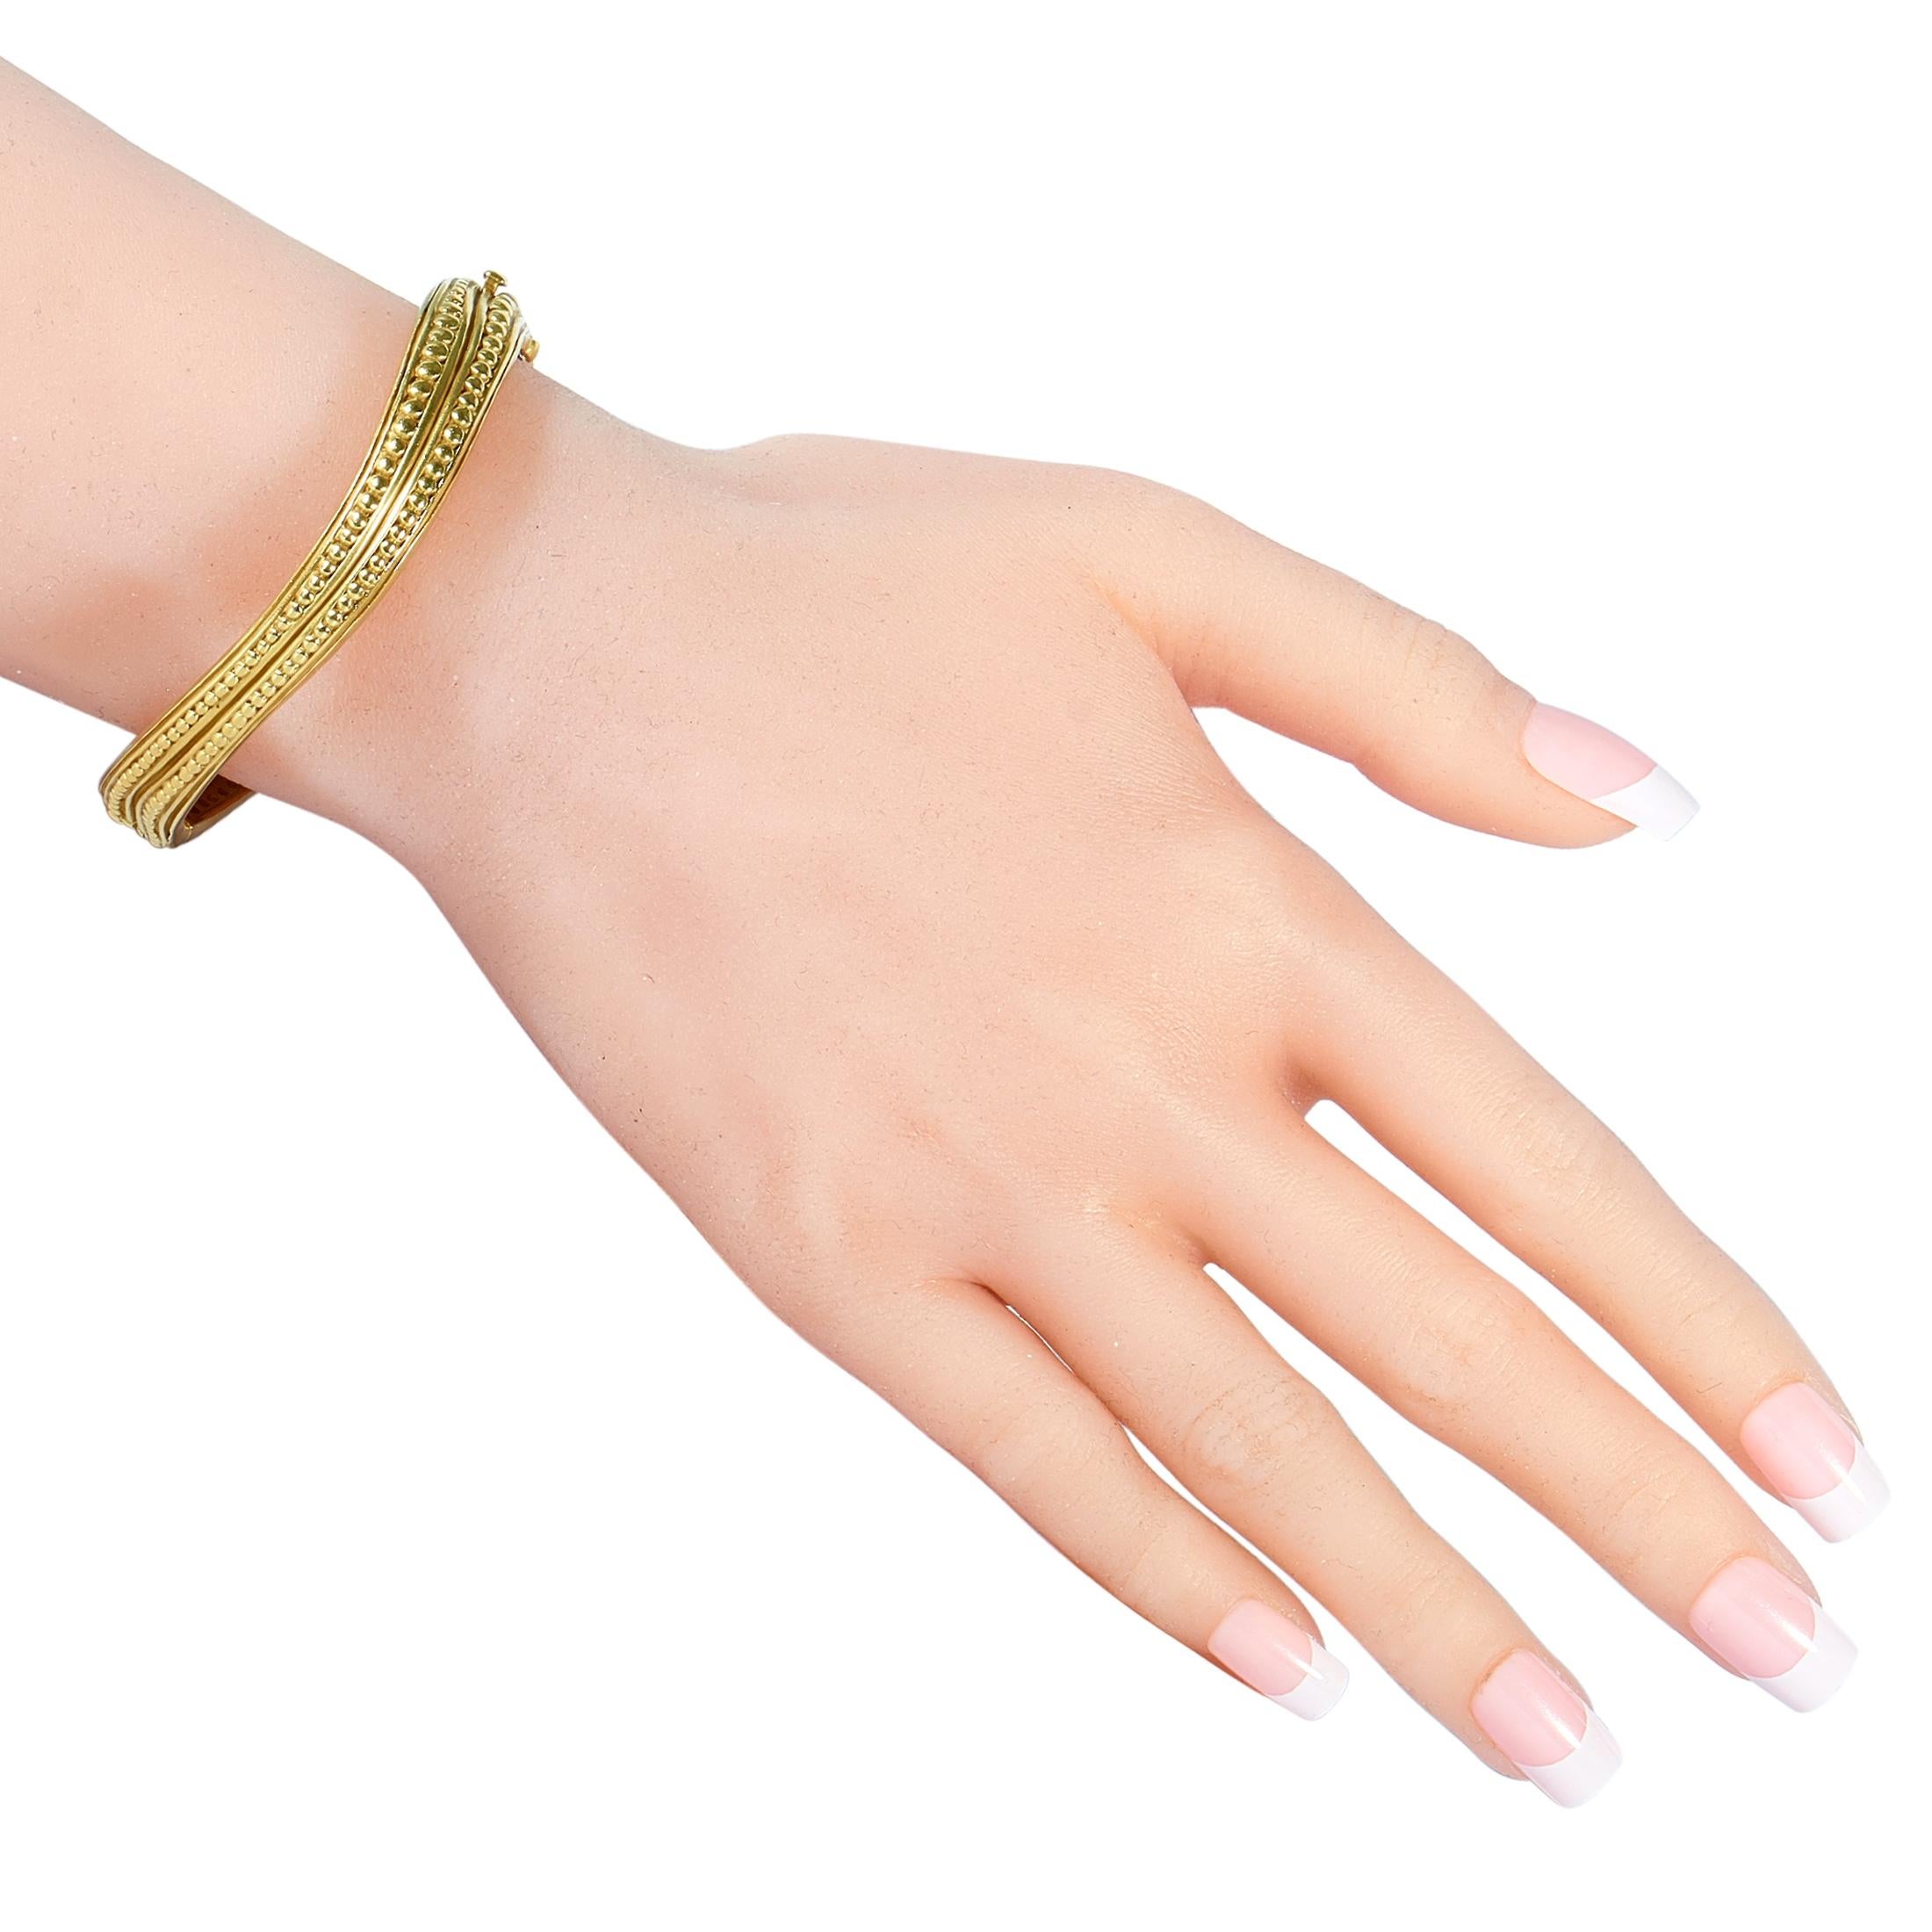 The Kieselstein-Cord “Caviar” bracelet is made of 18K yellow gold and weighs 38.4 grams, measuring 7” in length.